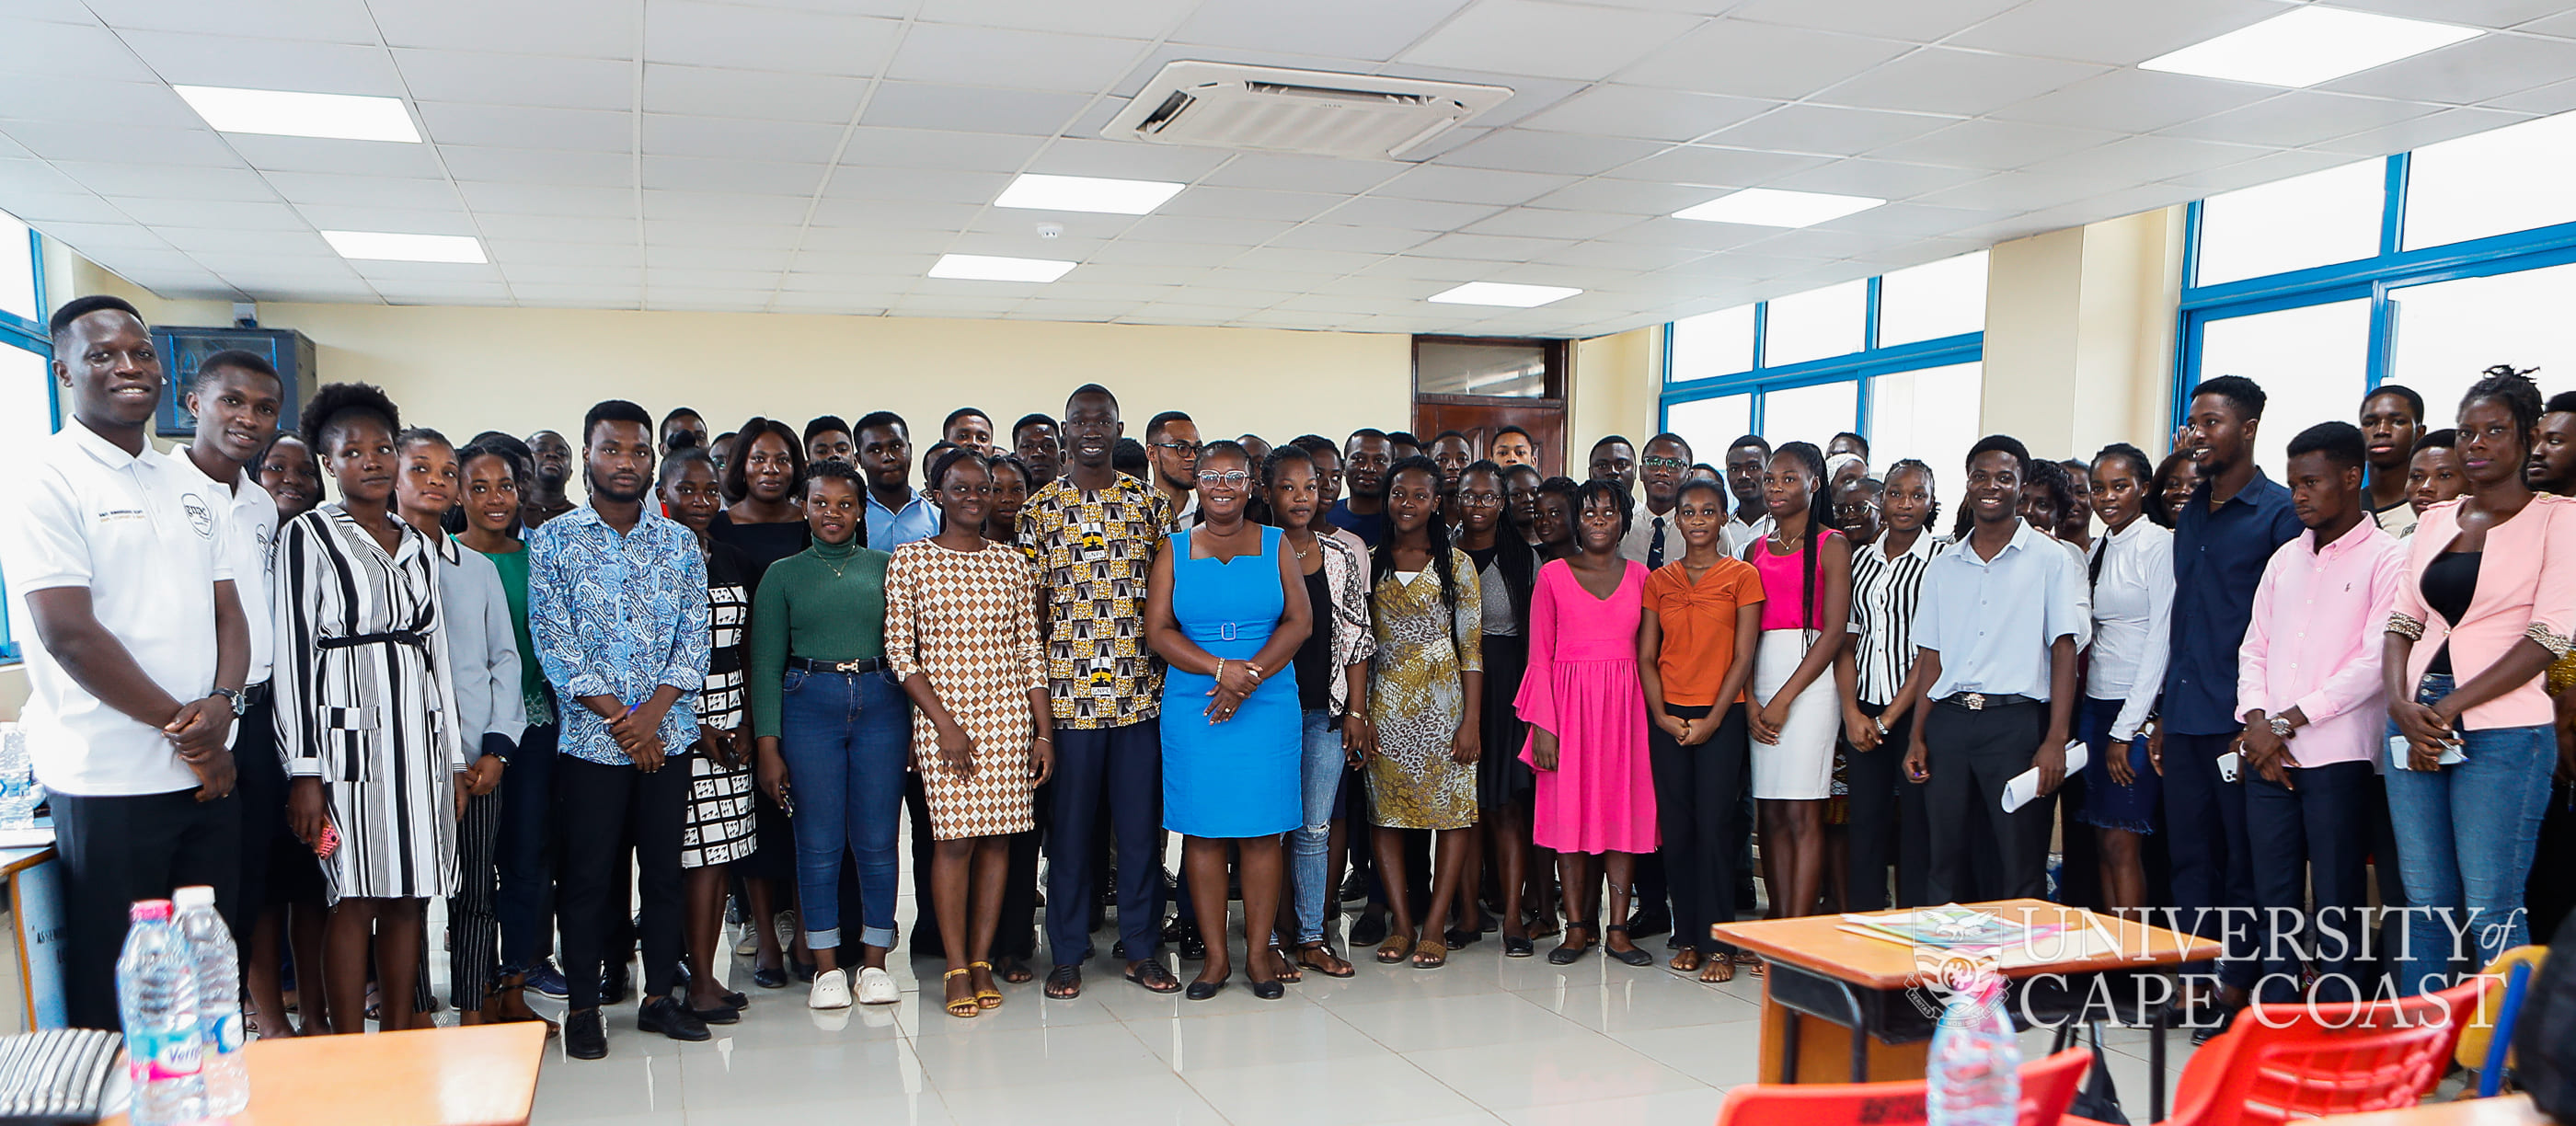 A Group Picture of All GNPC Beneficiaries, GNPC Executives and StuFSO Staff of the Event